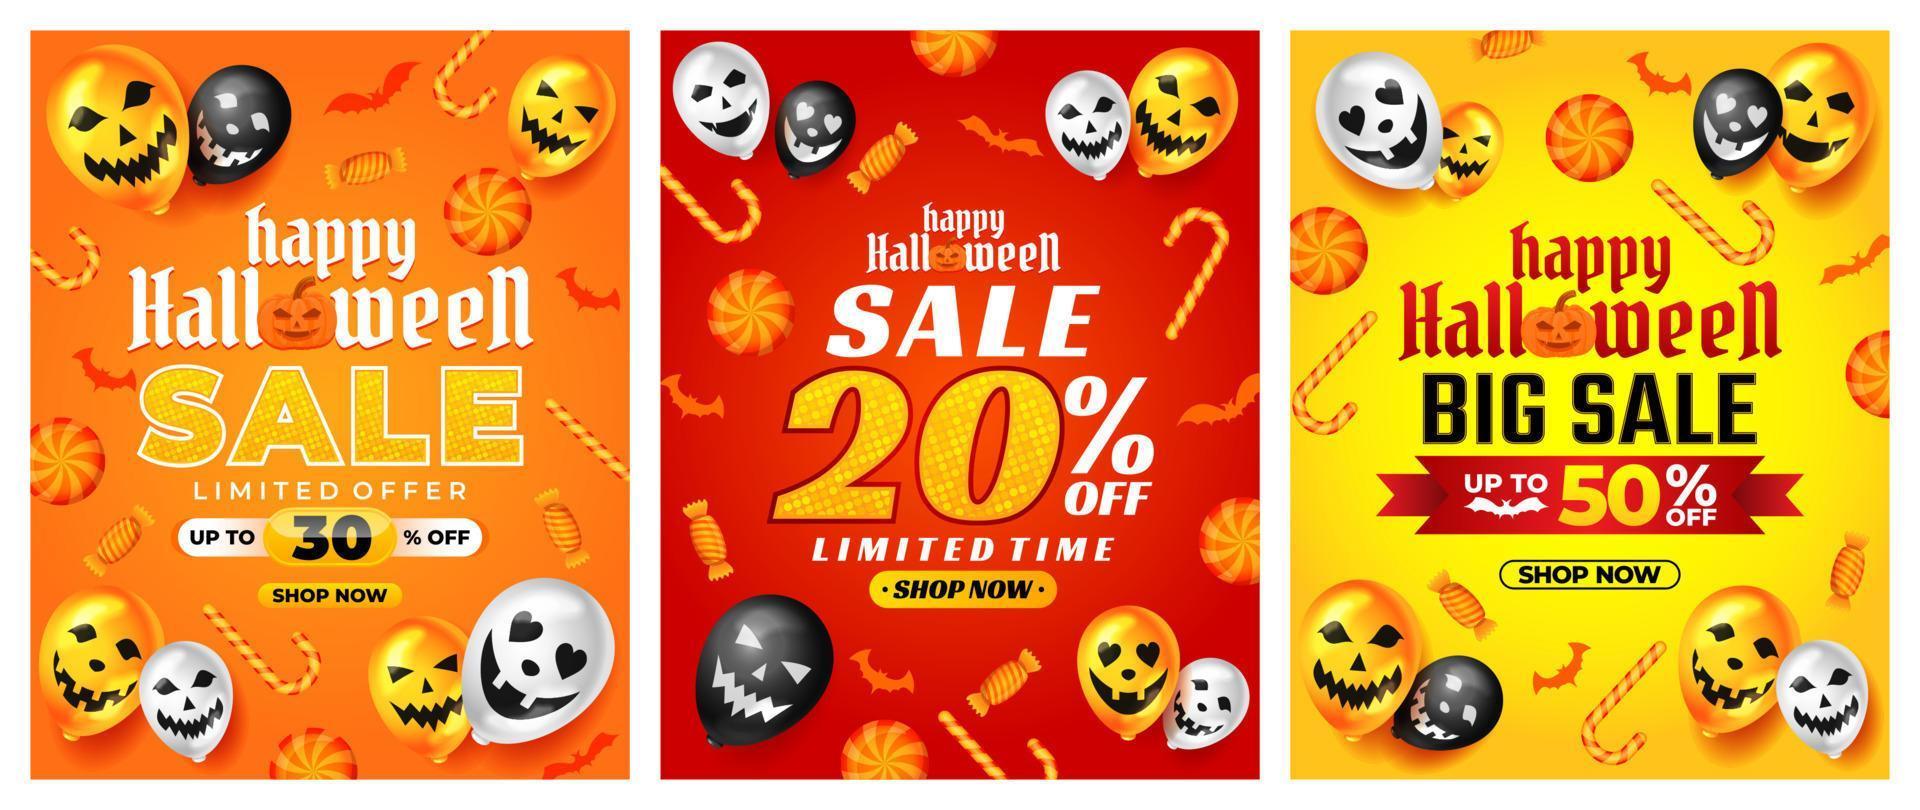 Halloween Sale Promotion  with scary balloon and candy vector, happy halloween background for business retail promotion, banner, poster, social media, feed, invitation vector